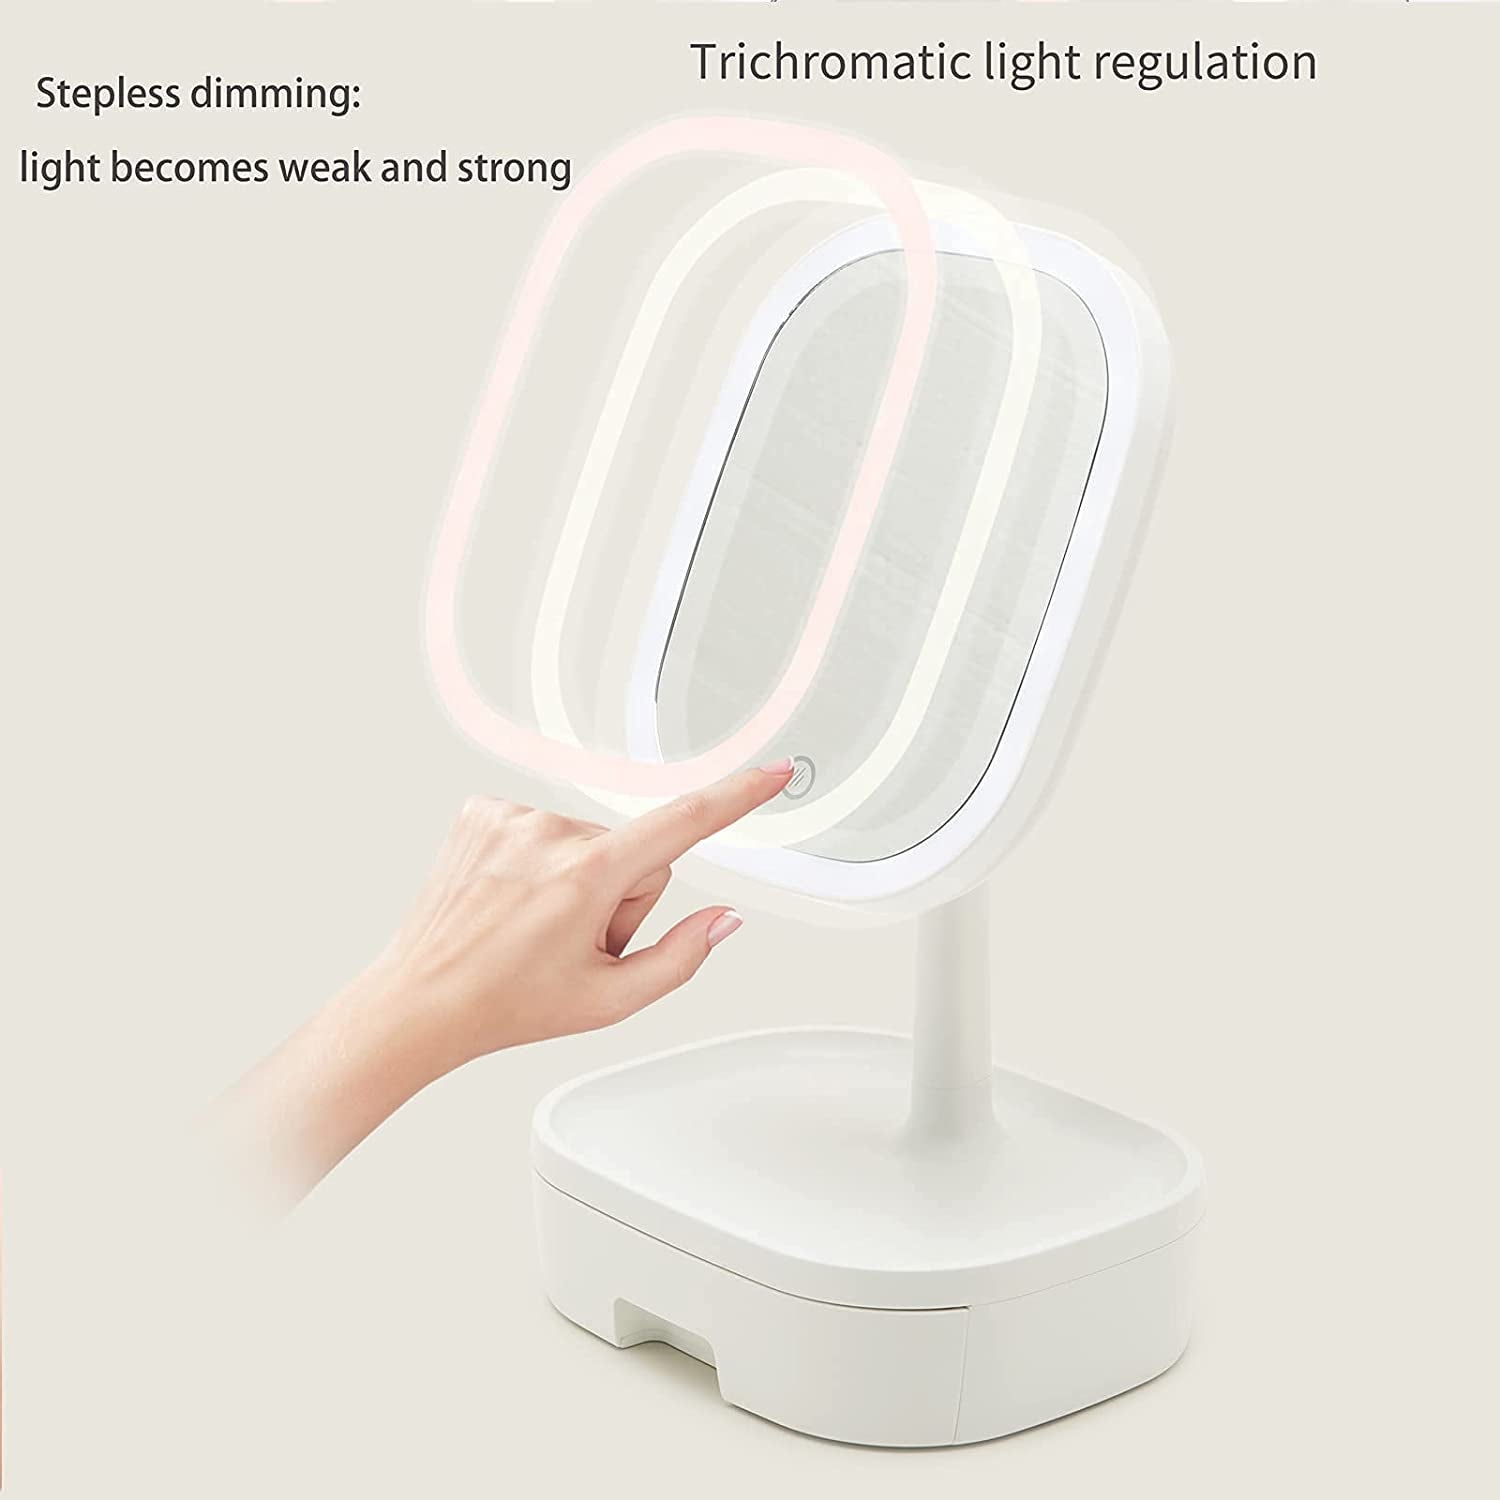 Makeup Mirror Small Desk Mirror with Lights & Magnification, Table Mirror with 10X Magnifying as Travel Mirror, Folding Portable Lighted Vanity Mirror with Lights for Home & Travel,White